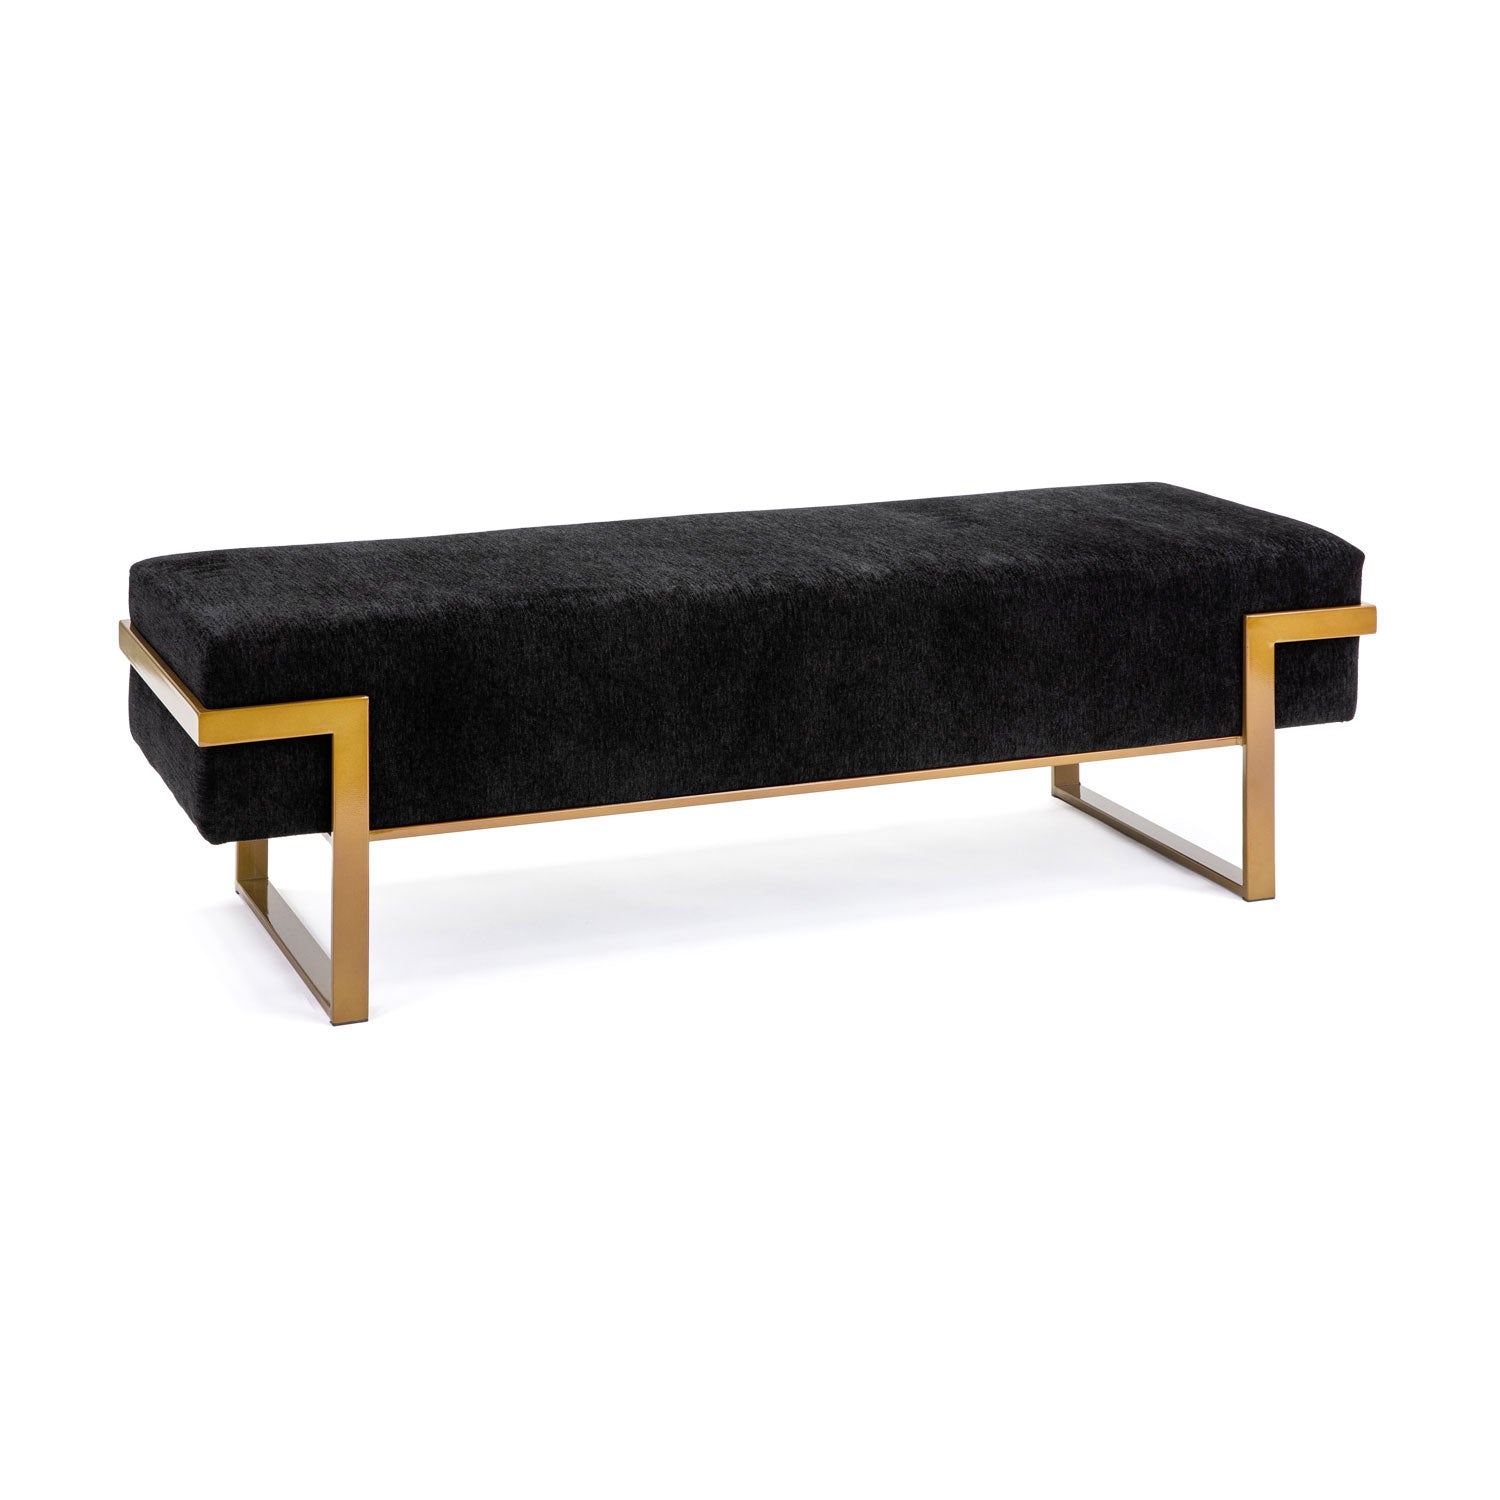 Wesley Allen Athena Bench with Sheen Gold Finish and Upholstered in Mid Black